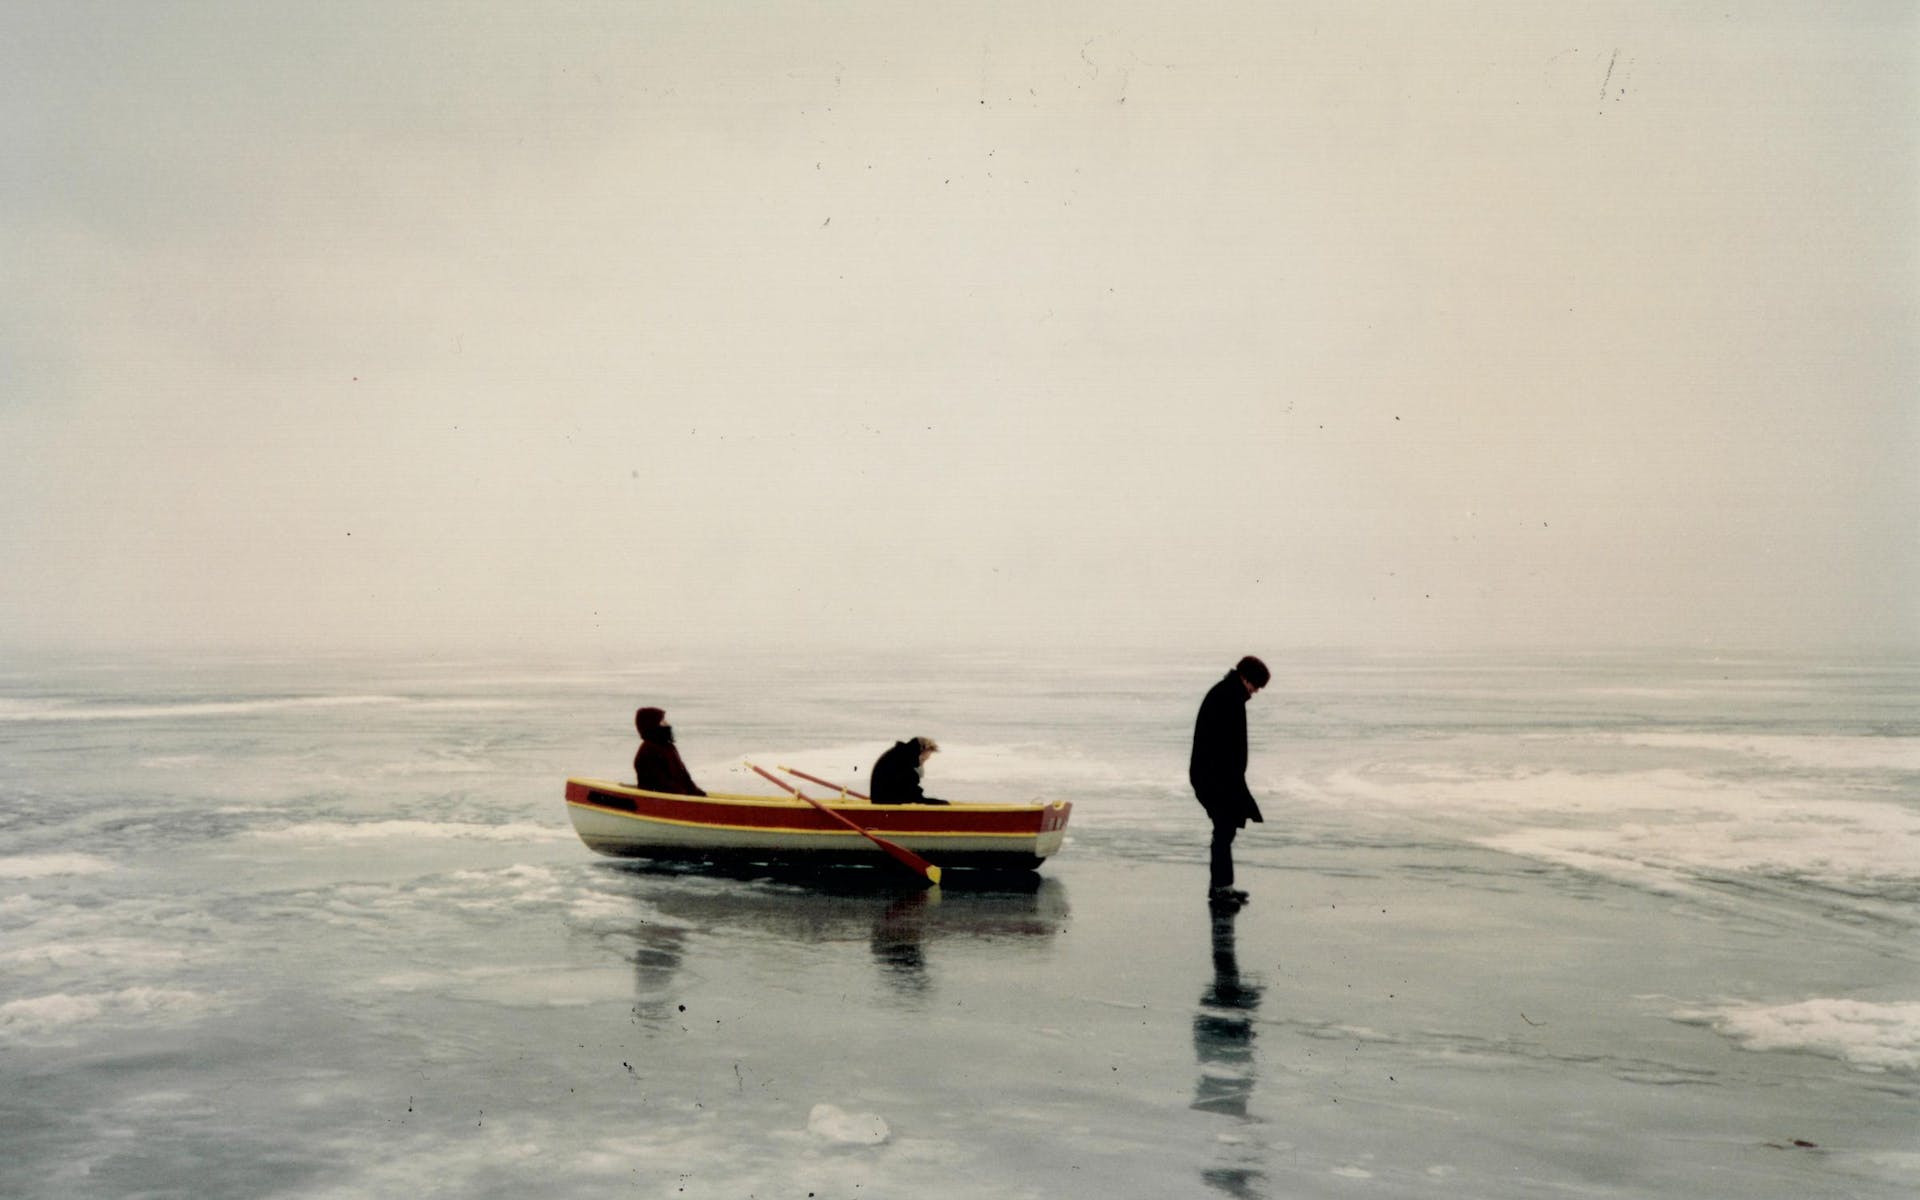 Two figures sit in a rowboat on top of a frozen lake, and a third stands on the ice. Gray sky and ice make up most of the image.